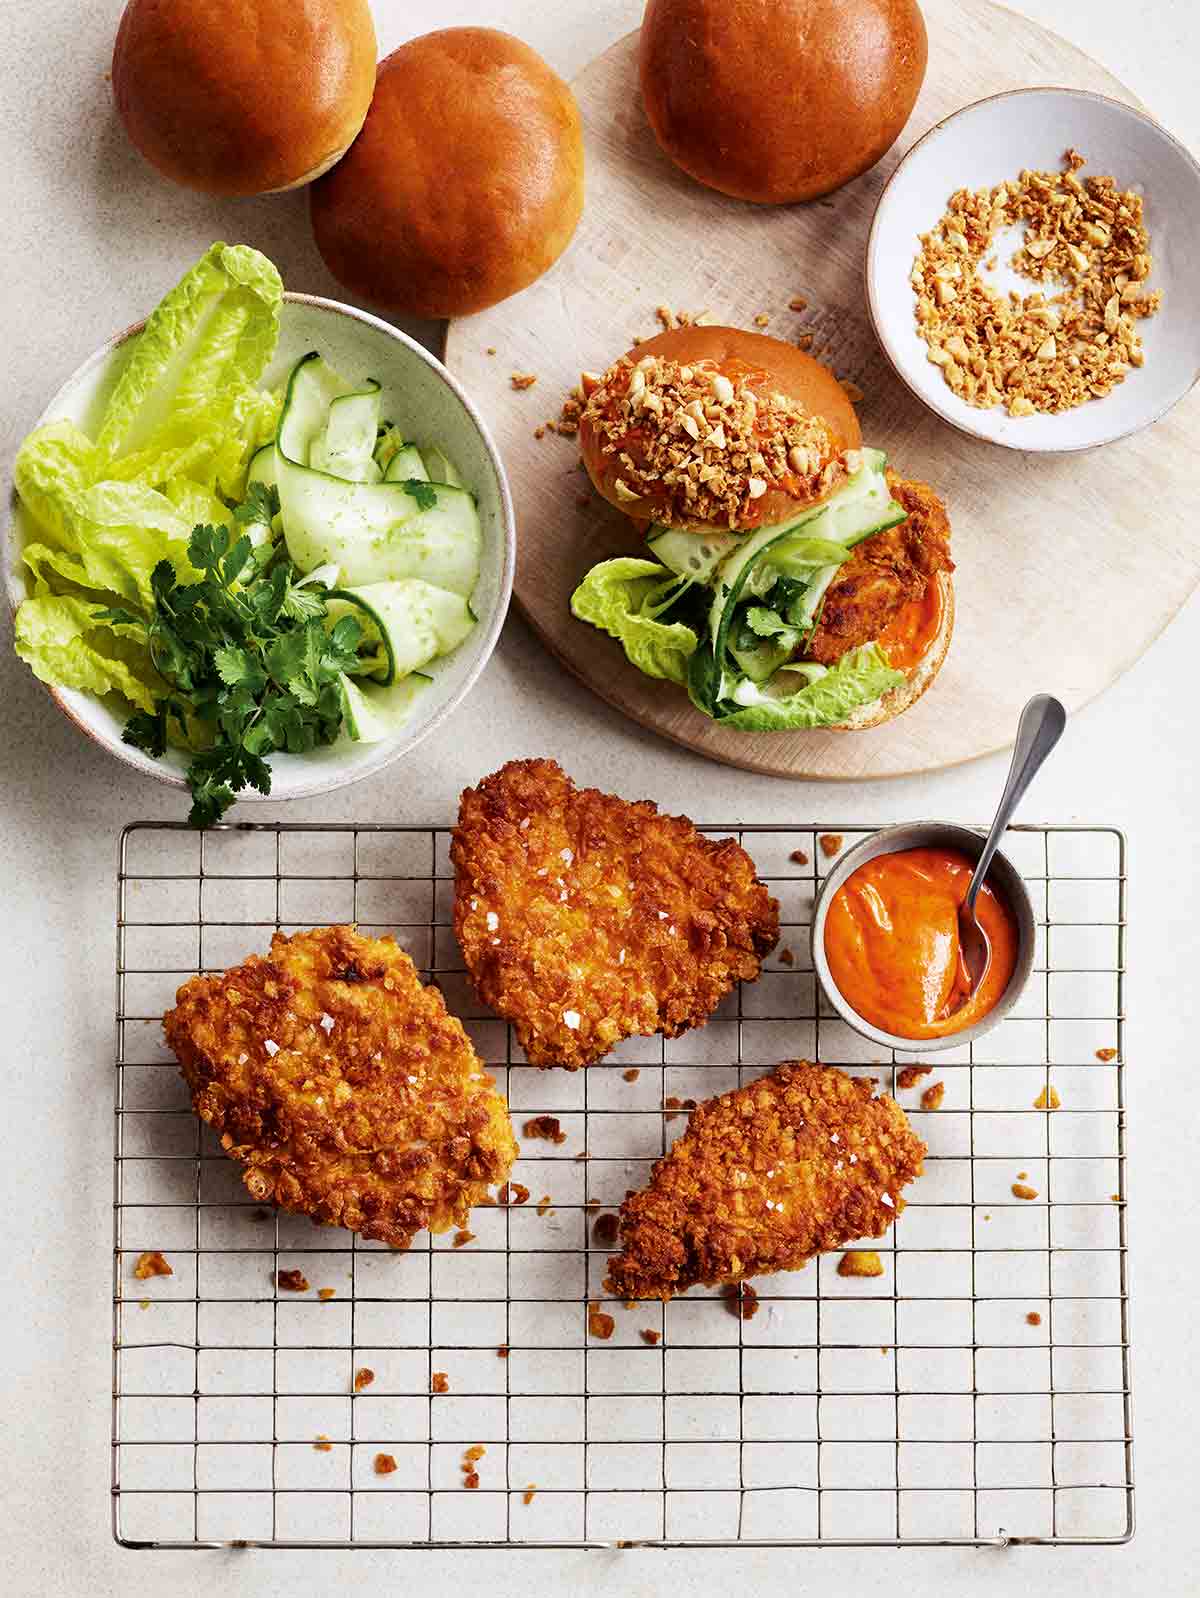 Three pieces of Gordon Ramsay's cornflake chicken on a cooking rack with buns, salad, and peanut topping on the side.